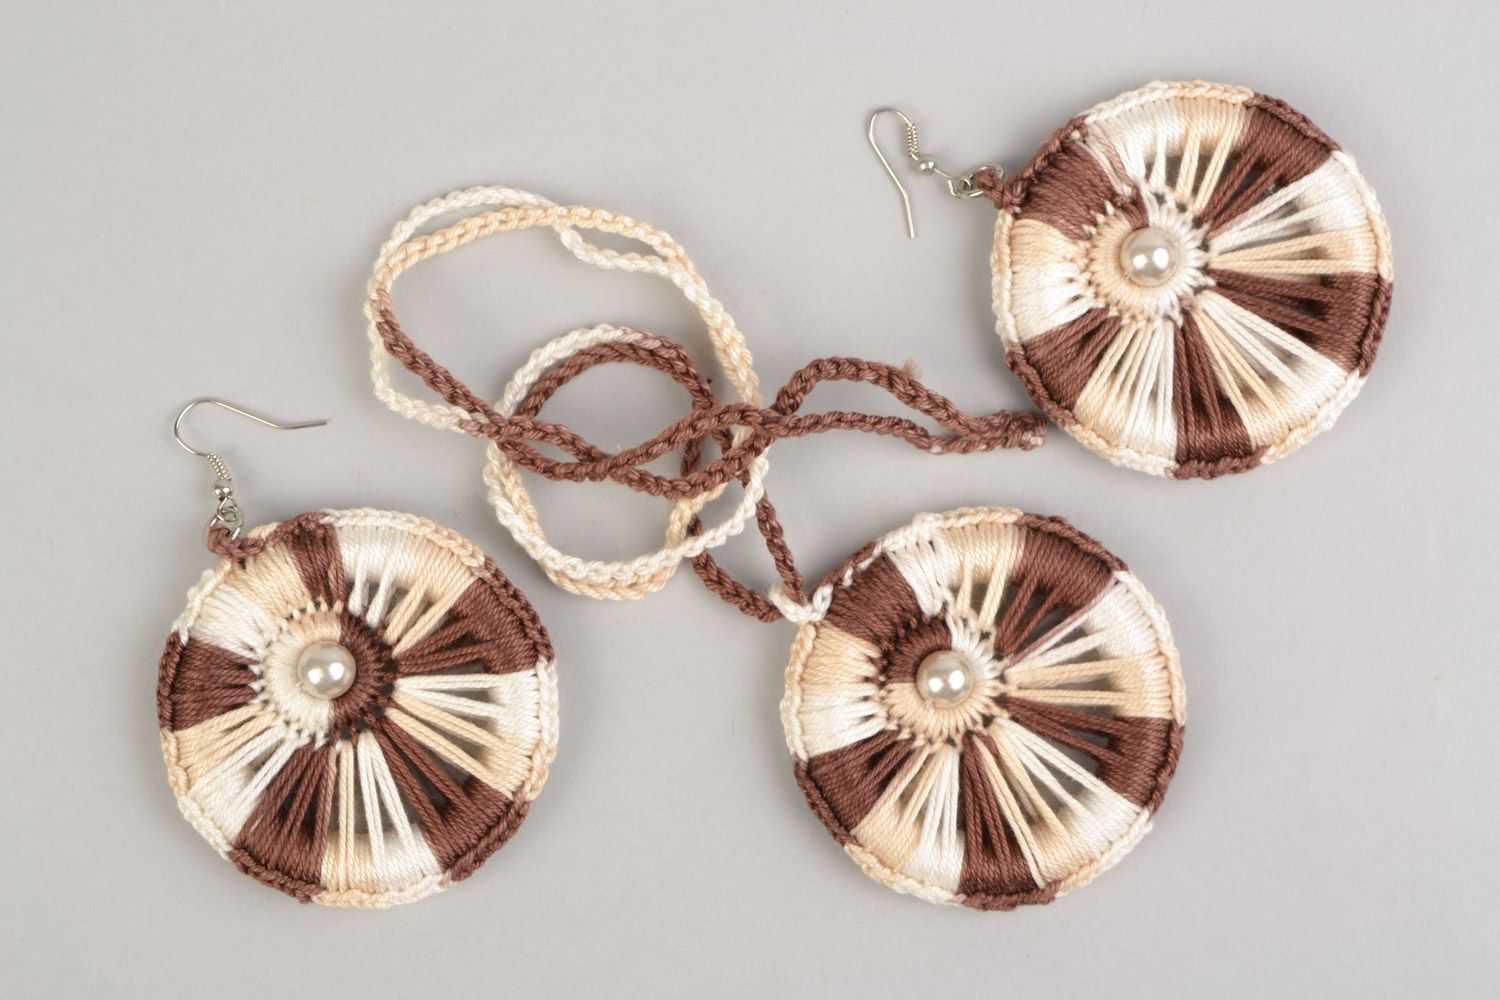 Set of handmade jewelry woven of cotton threads 2 items earrings and pendant photo 2